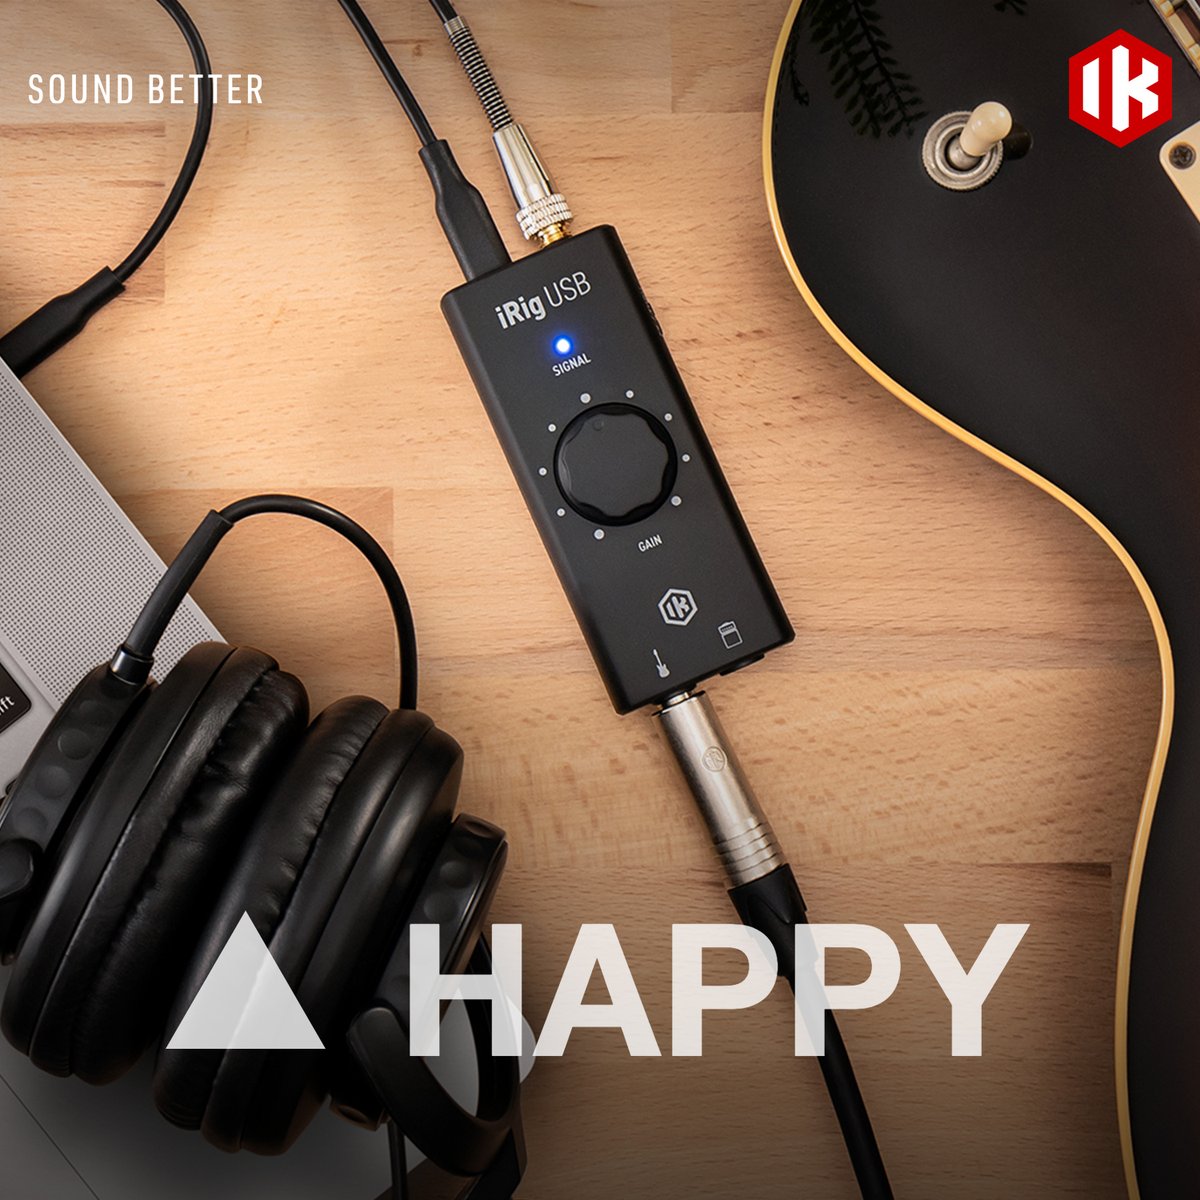 When you can't or don't want to carry a pedalboard and amp to your next destination iRig USB is the perfect solution. Check out this review from @HappyMagTV. bit.ly/happymagirigusb